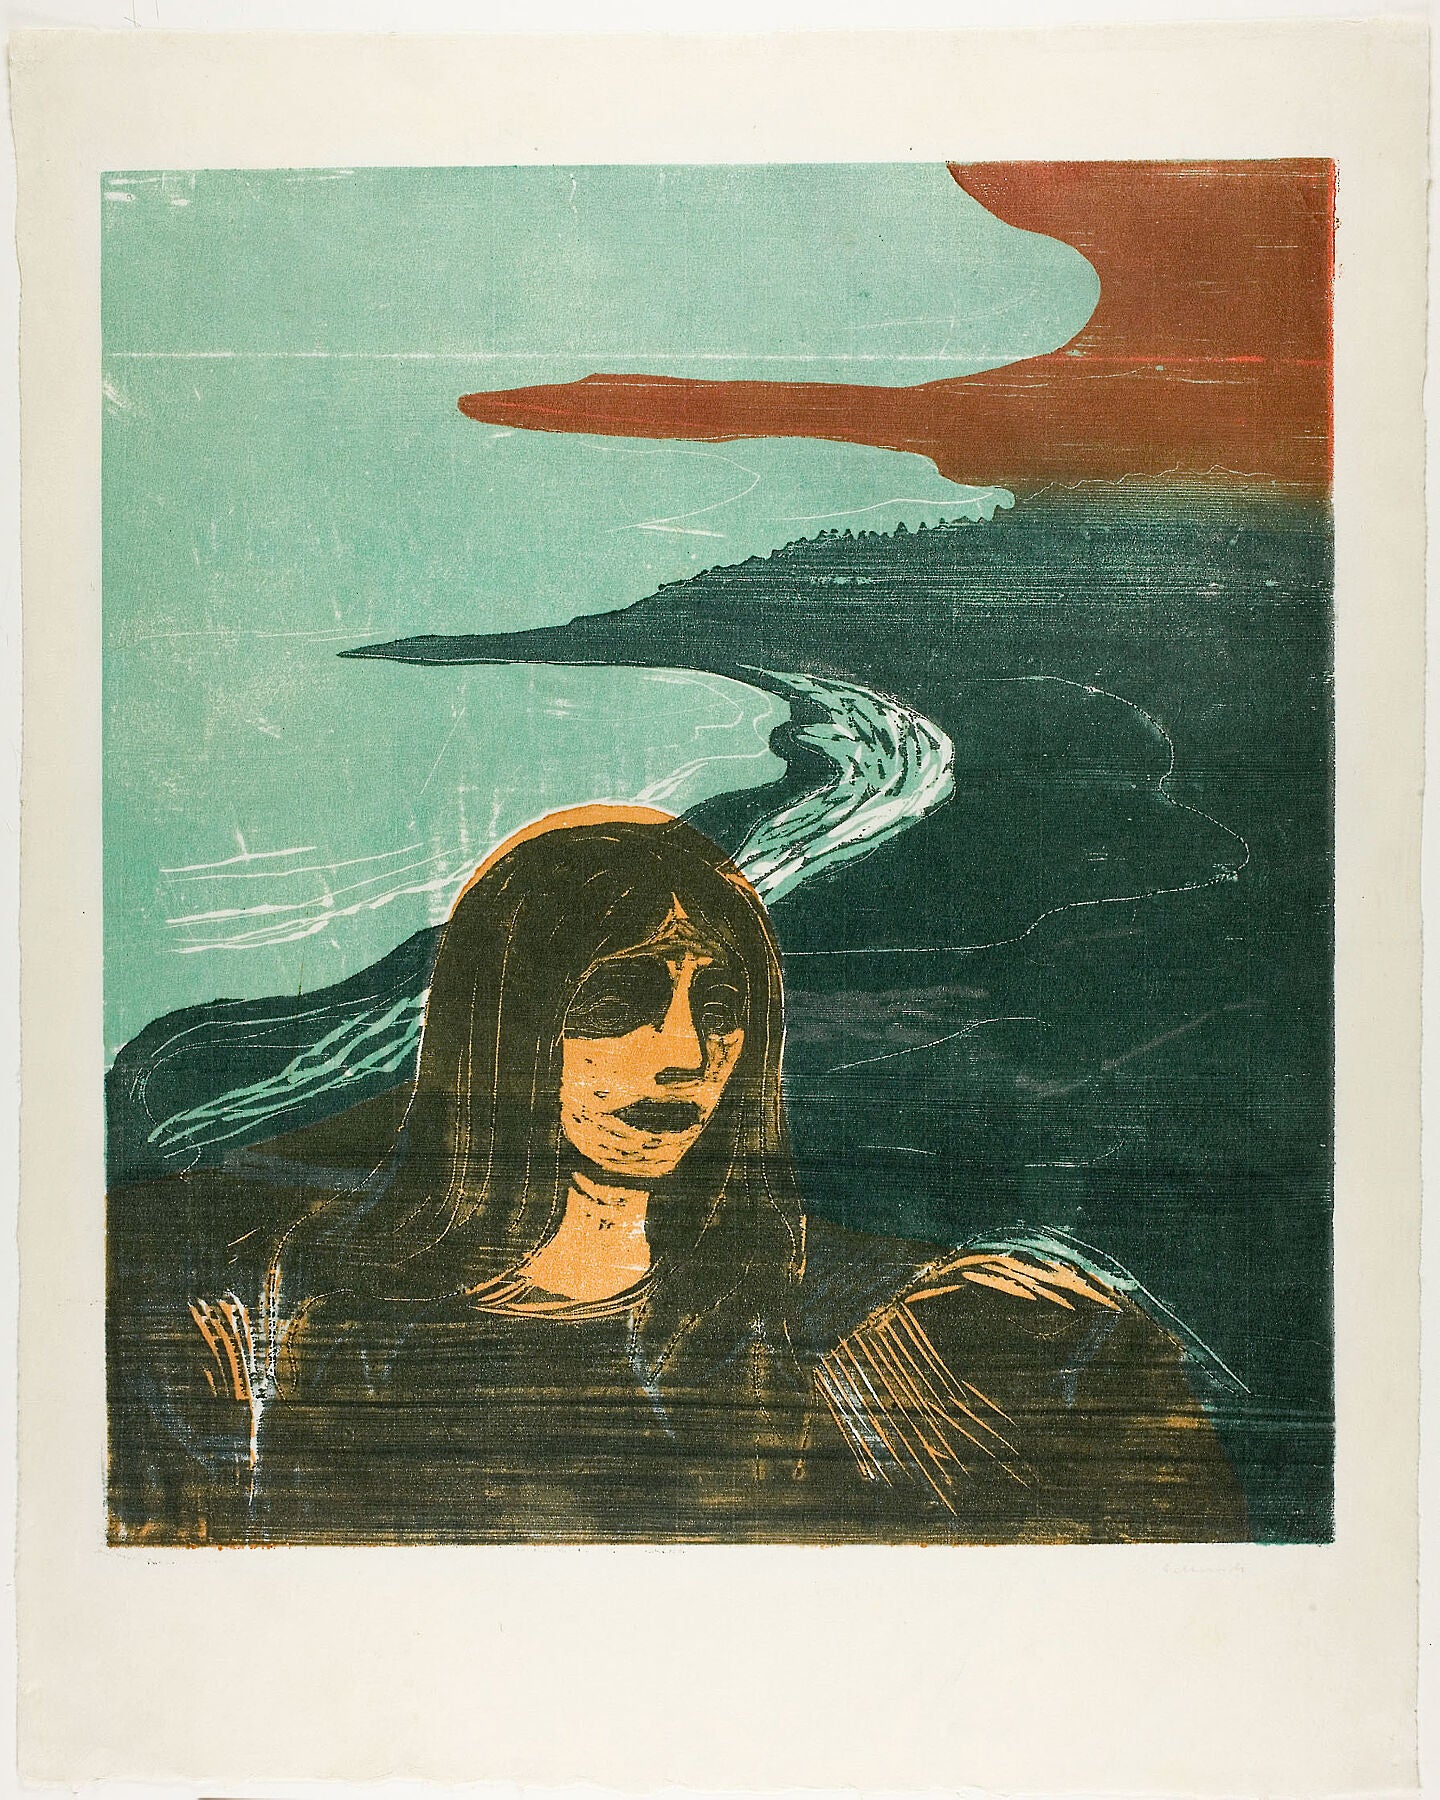 Woman’s Head against the Shore by Edvard Munch - 1899